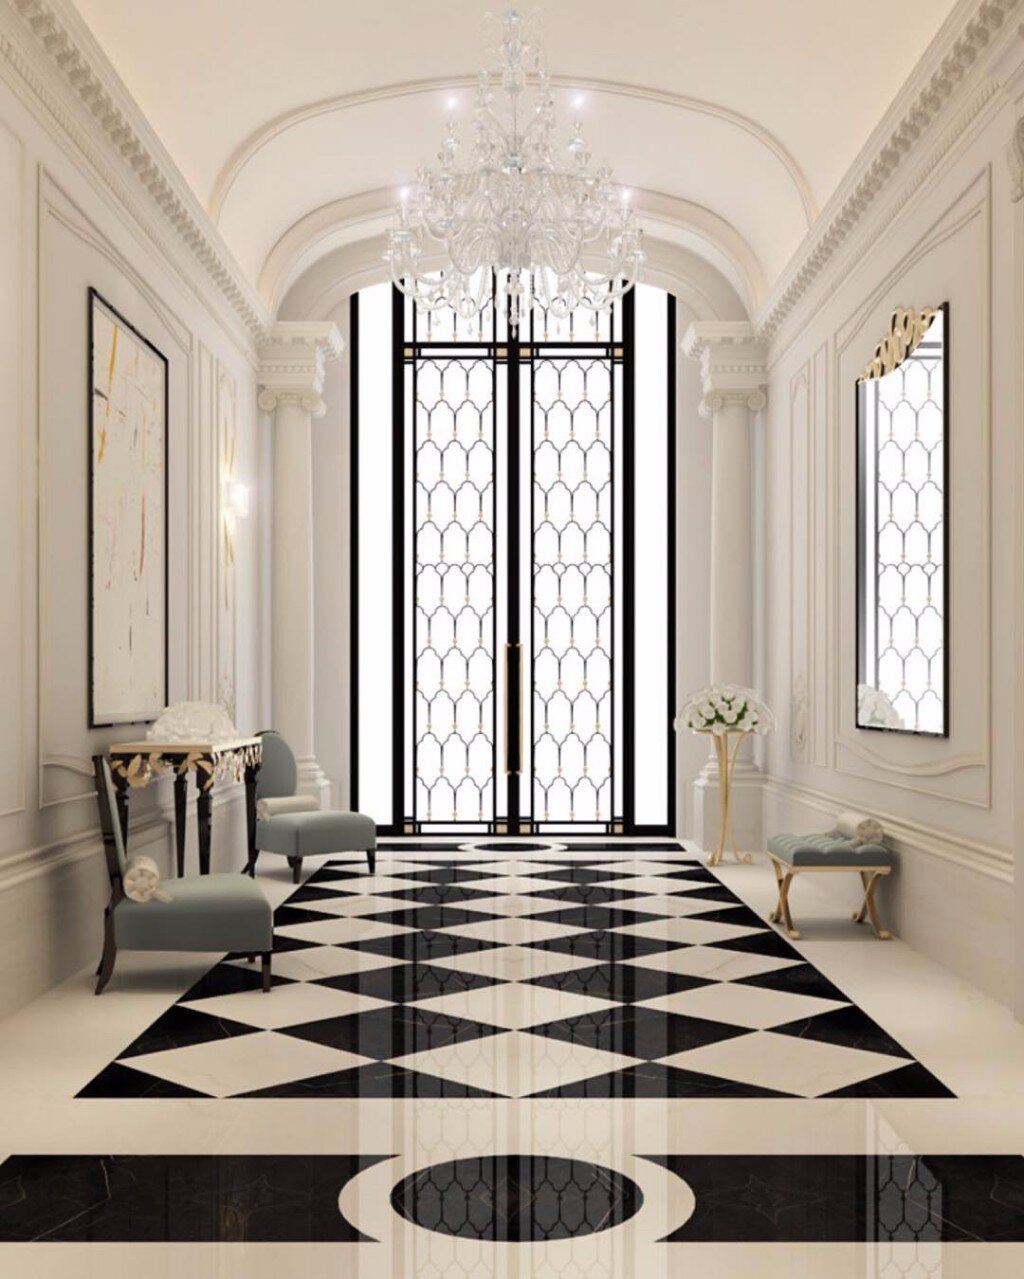 My Newest Obsession: Checkerboard Floors + Verde Marble — cristina depina  interior design